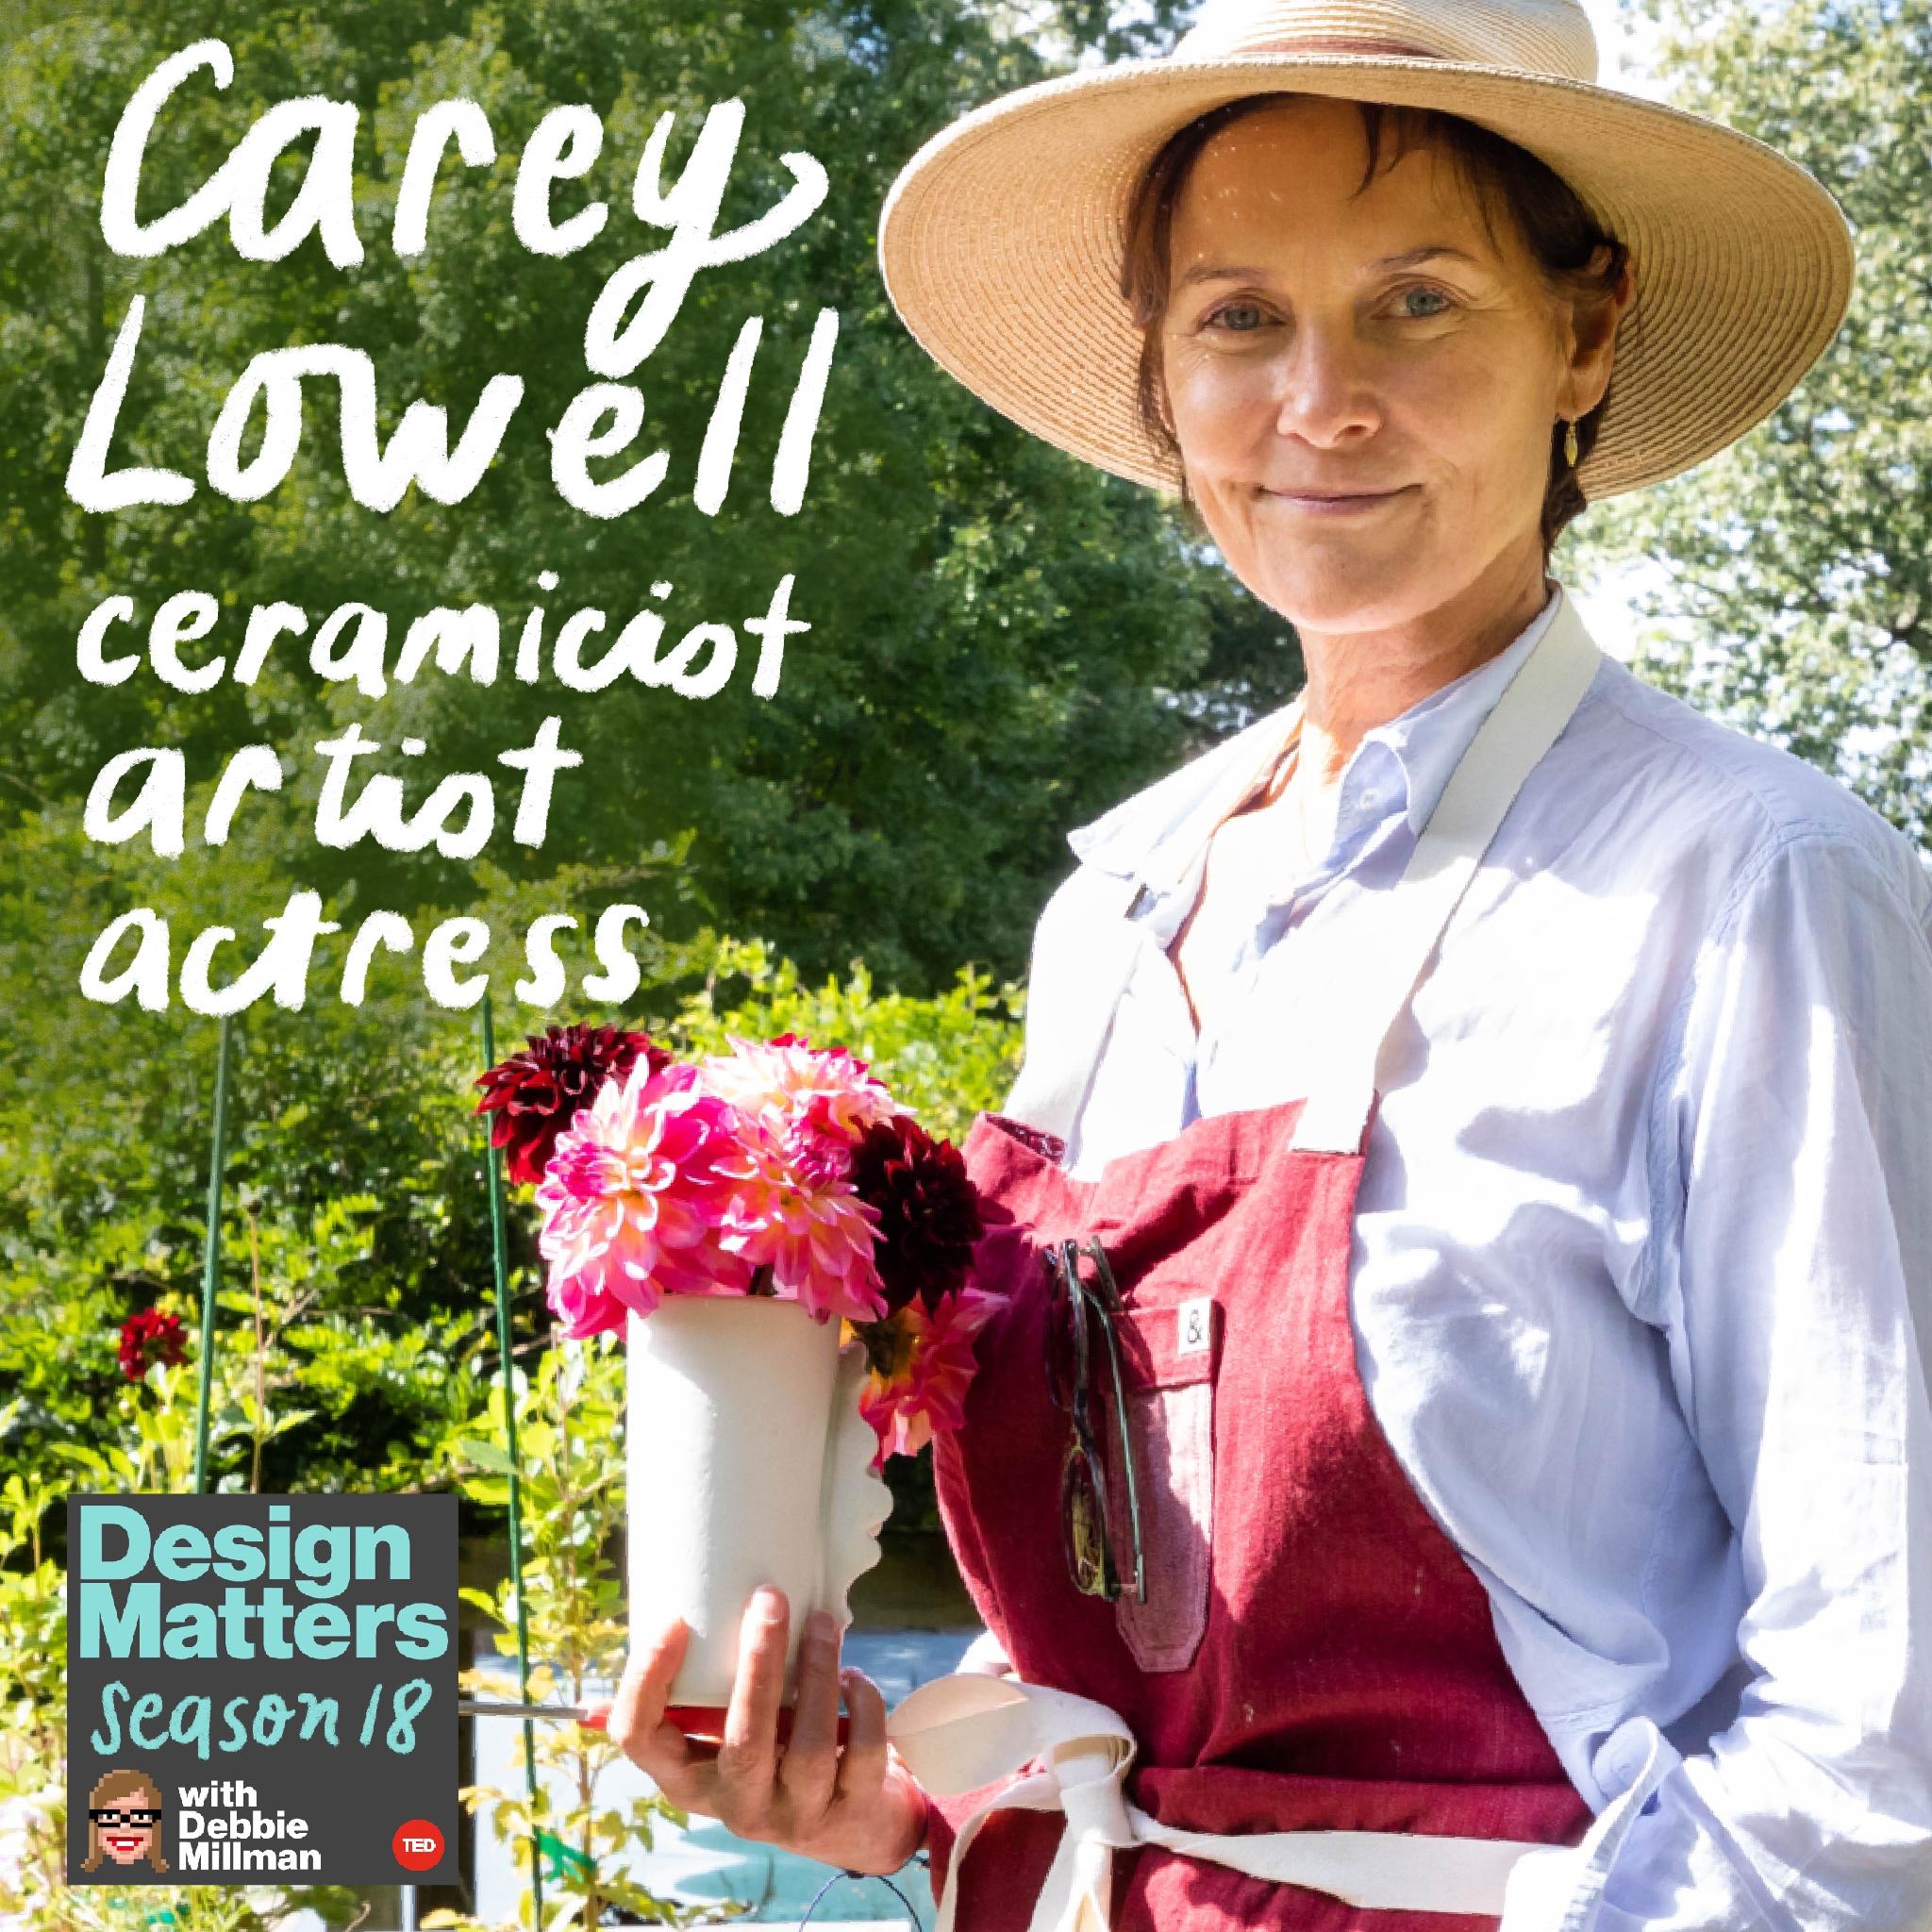 Thumbnail for "Carey Lowell".